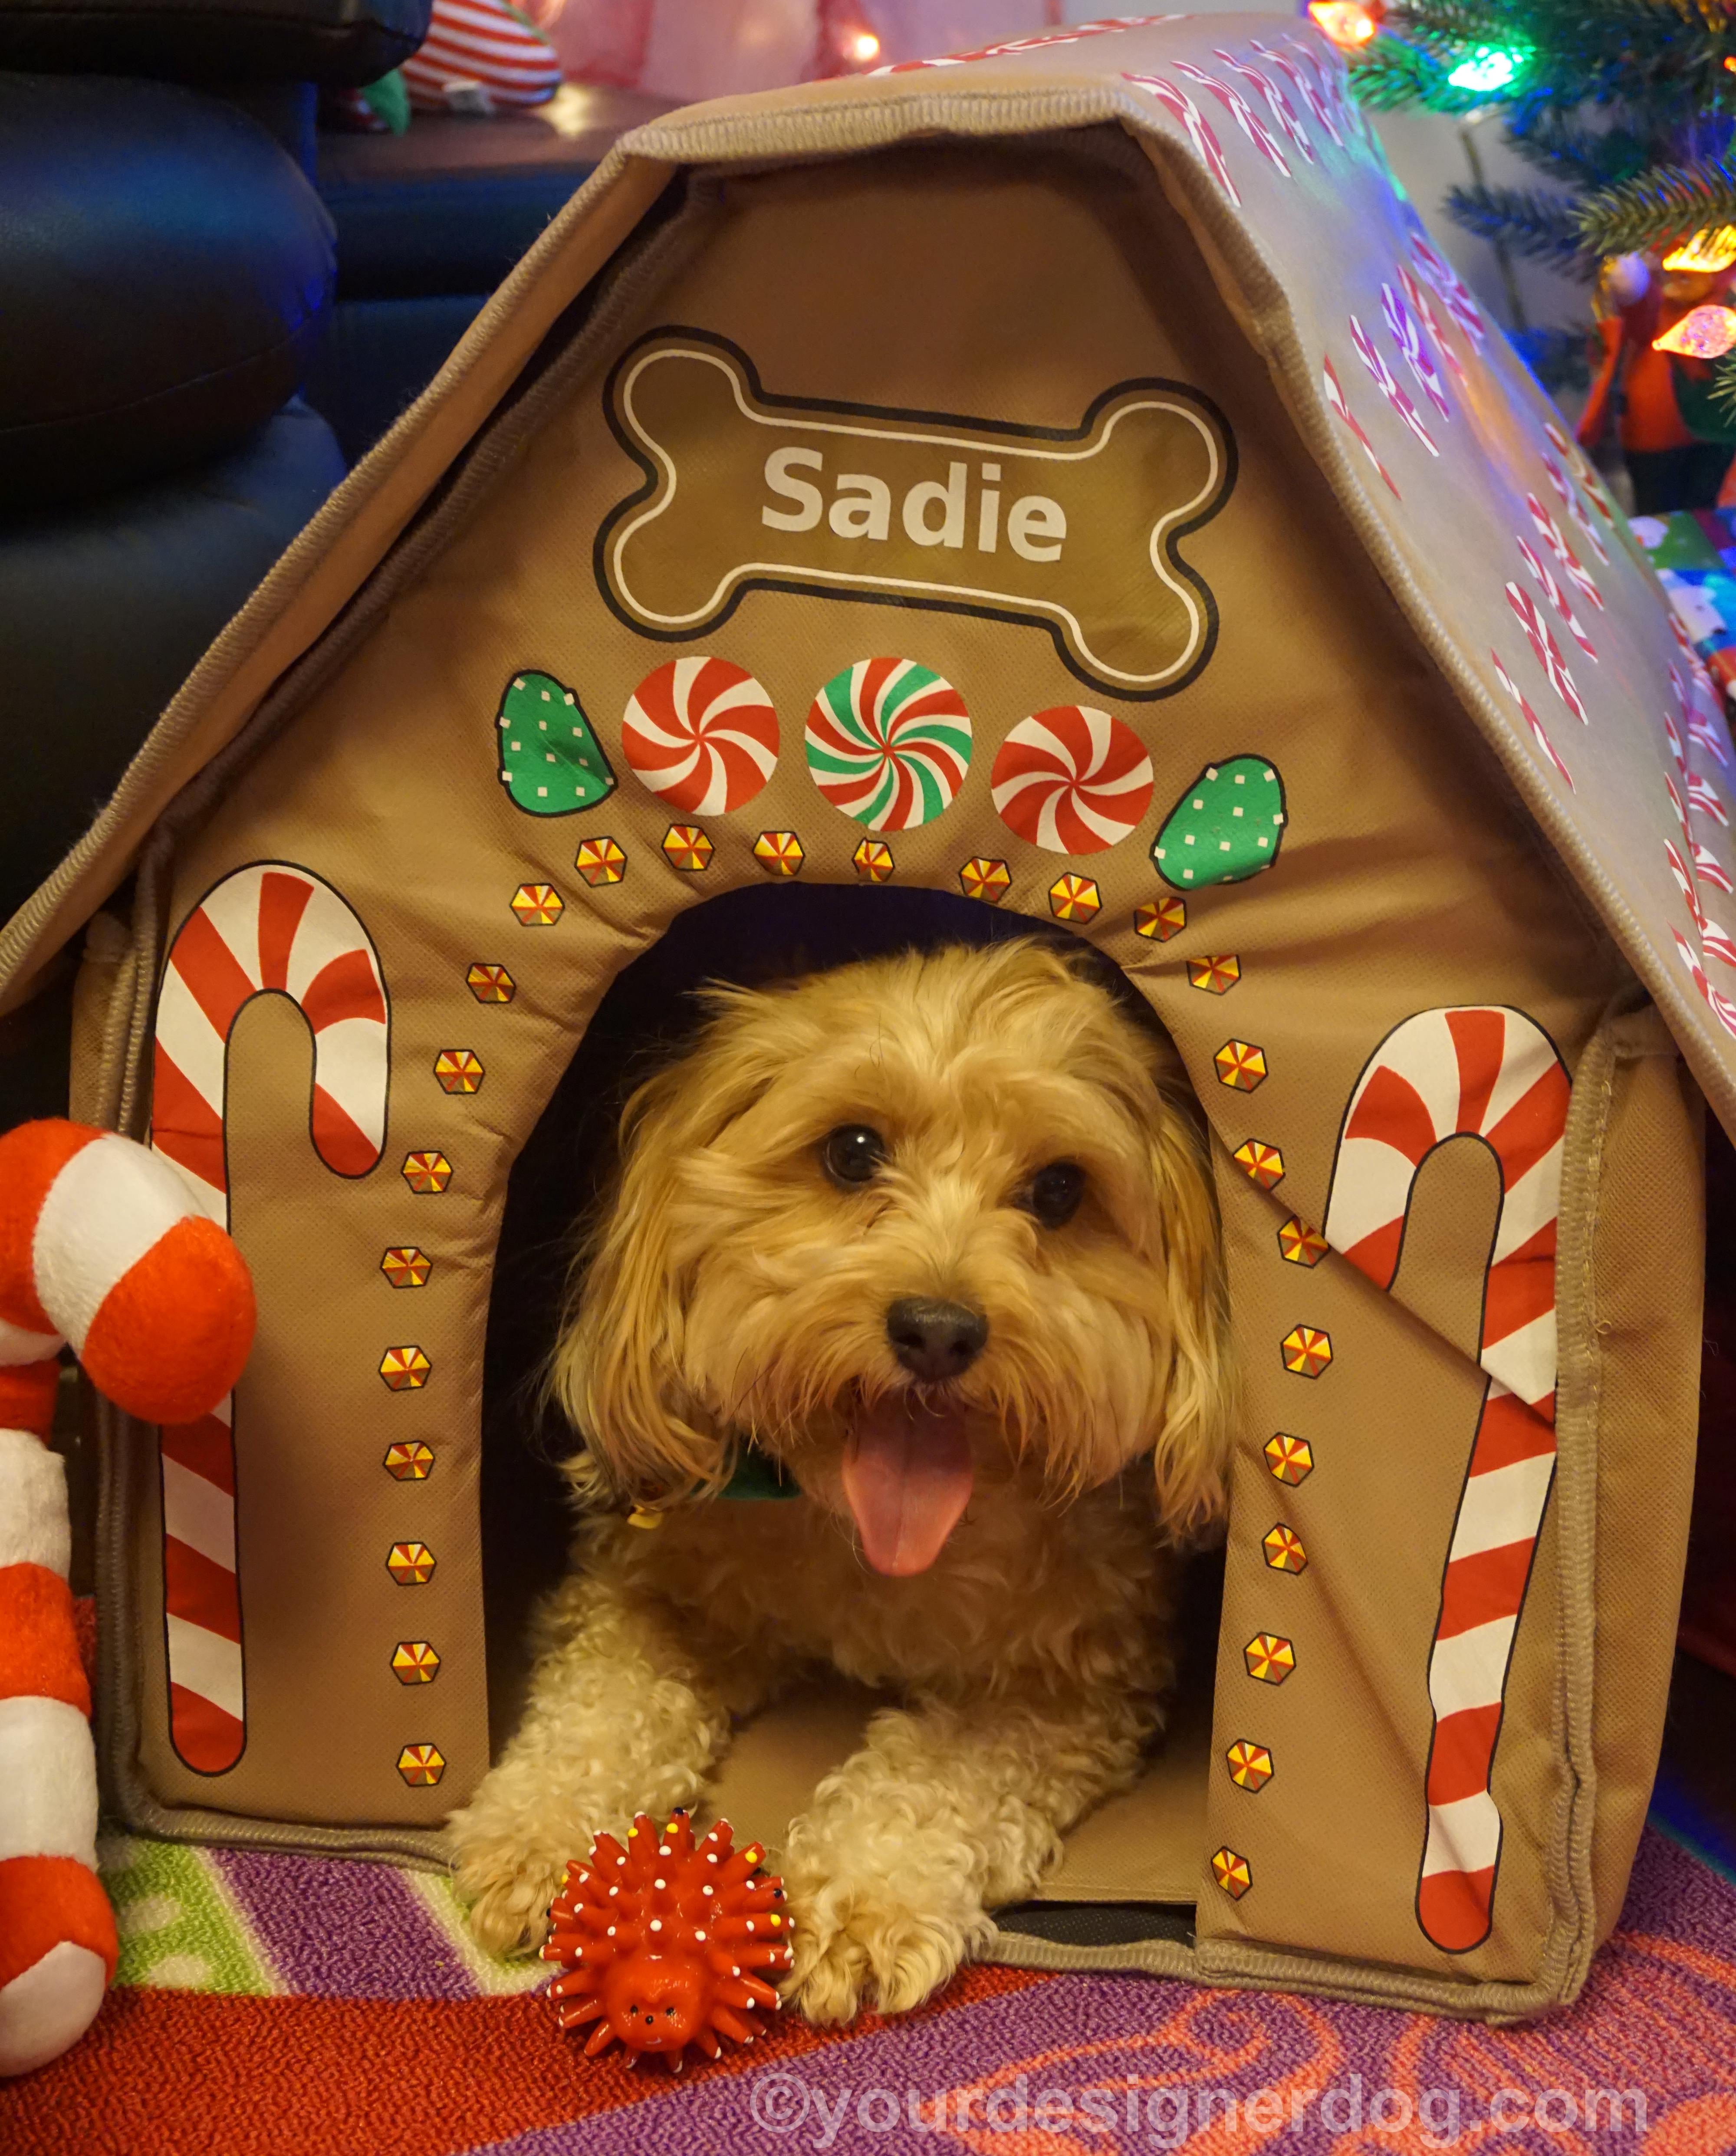 dogs, designer dogs, yorkipoo, yorkie poo, tongue out, christmas, gingerbread house